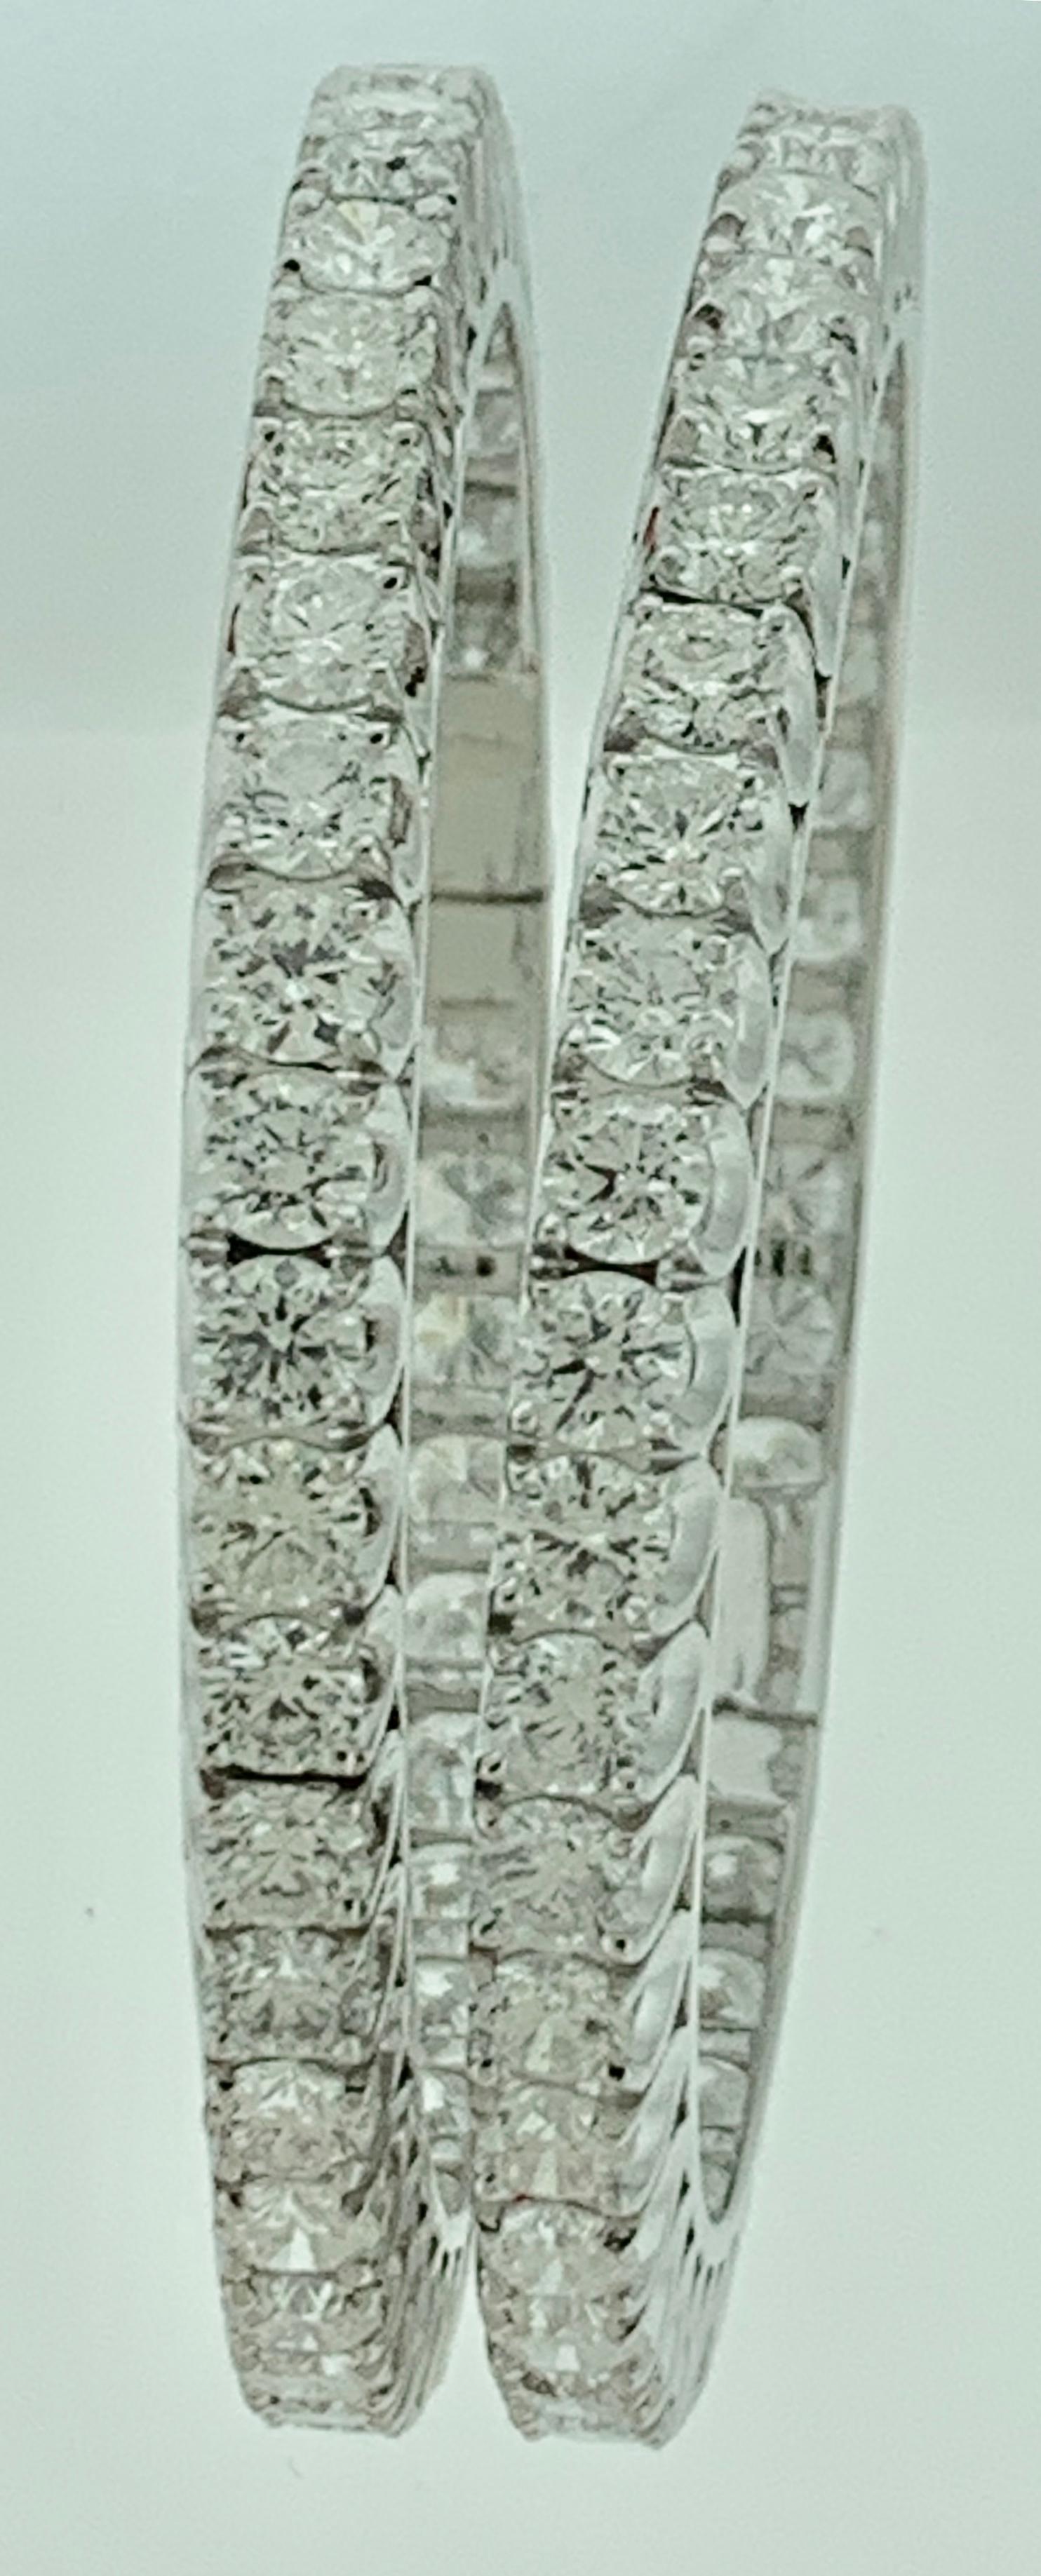 40 Pointer Each, 36 Ct Single Line Eternity 18 Kt Gold and Diamond Bangle, Pair For Sale 2